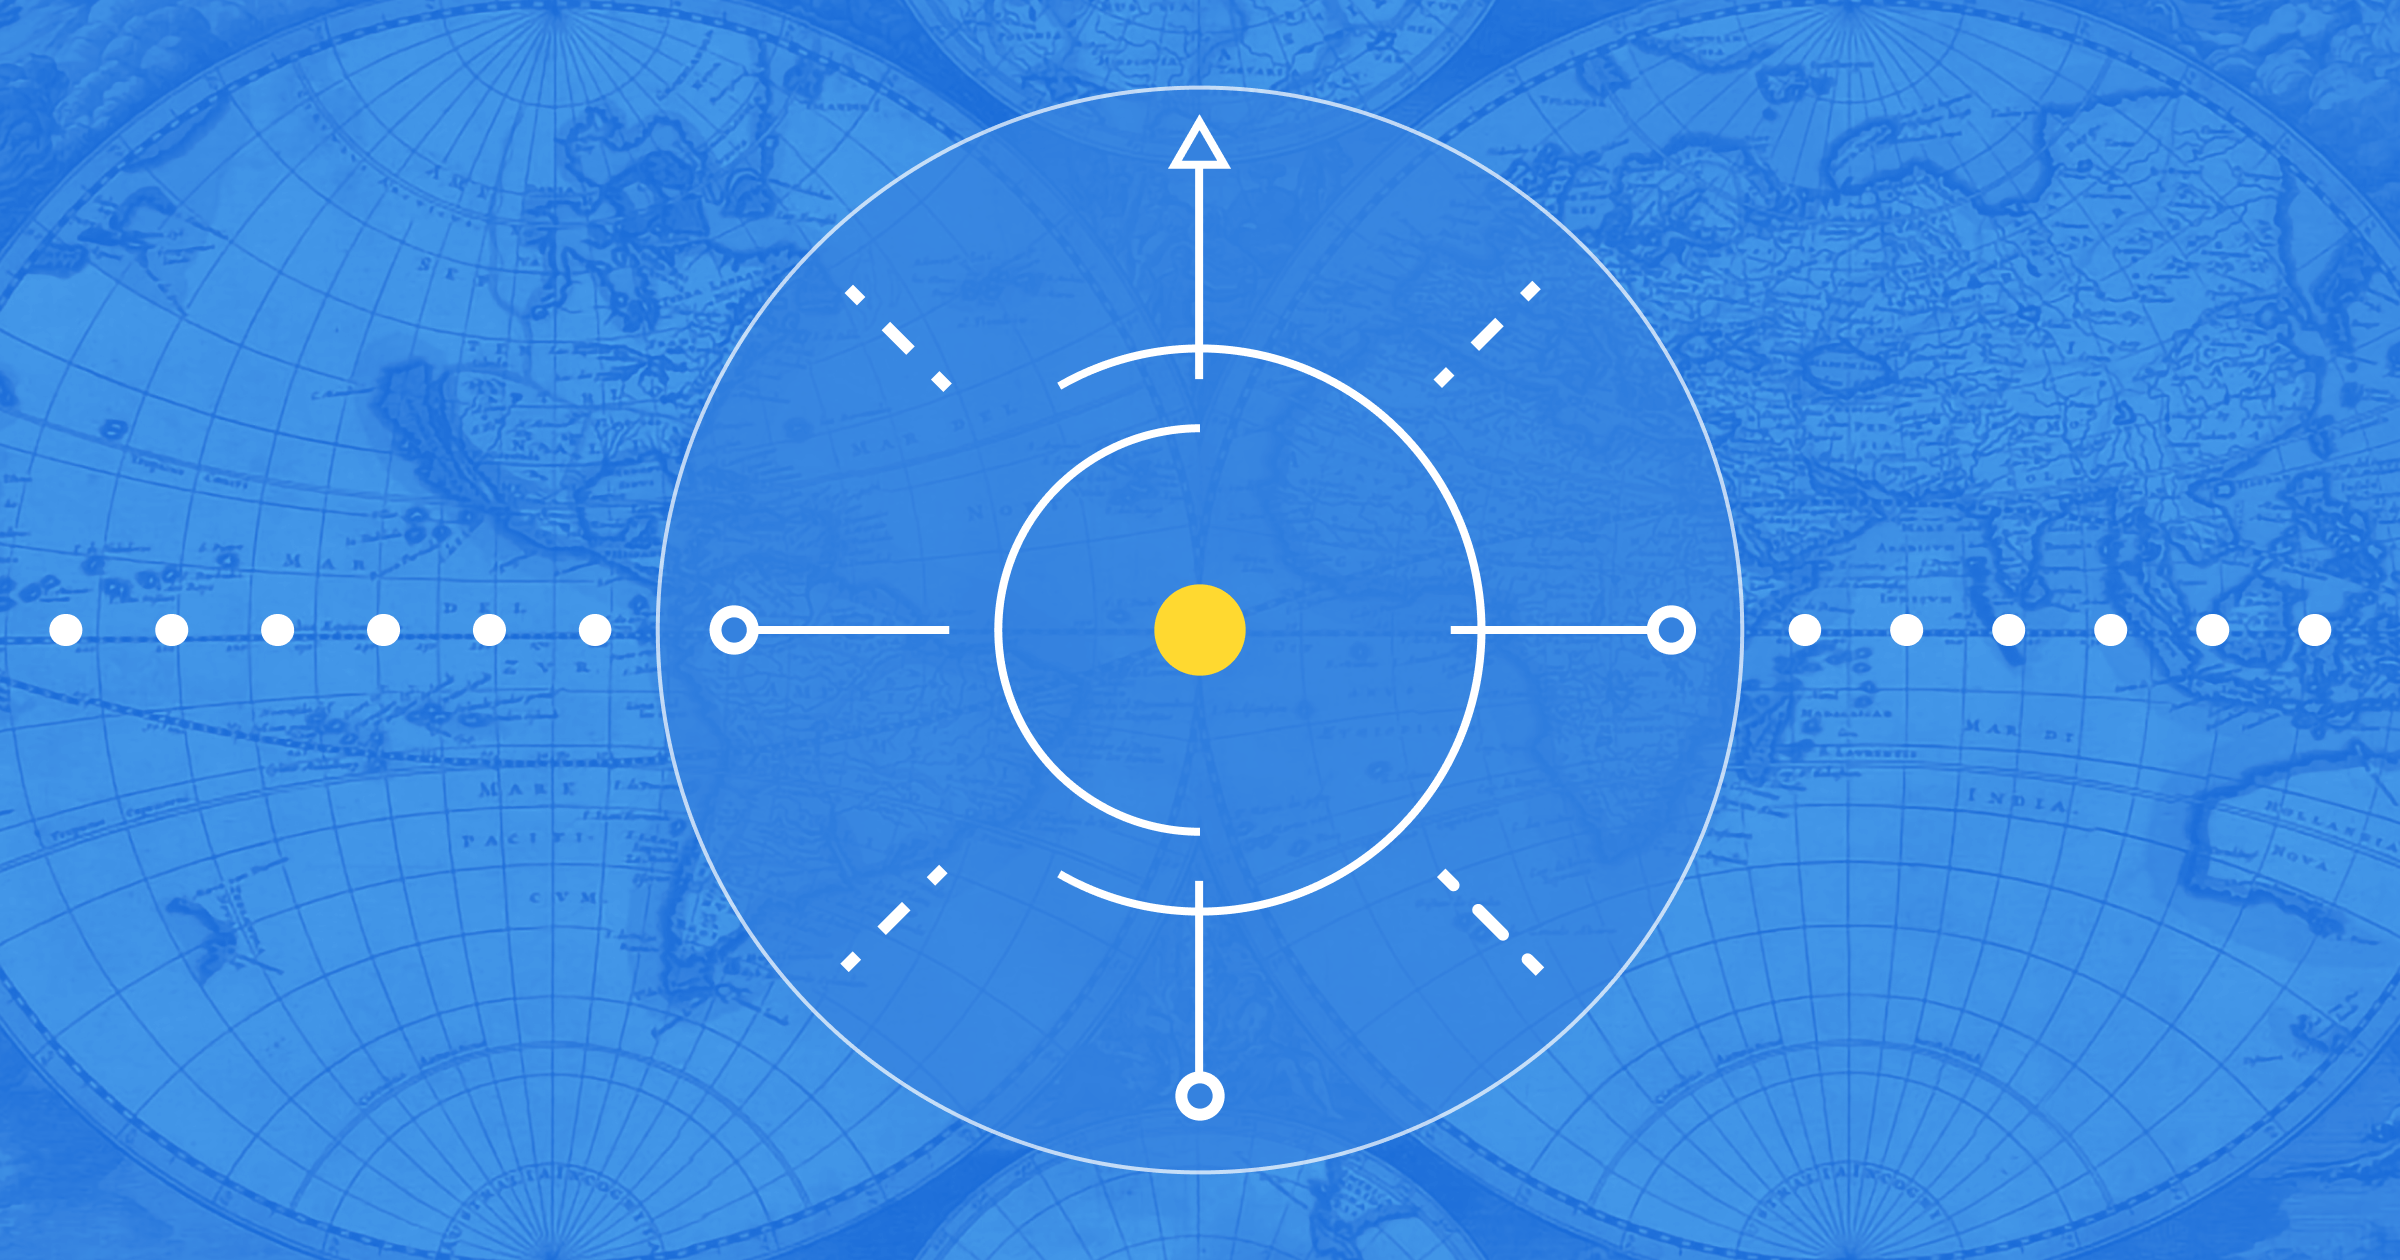 Old world map on blue background with compass-like design overlaid across the top